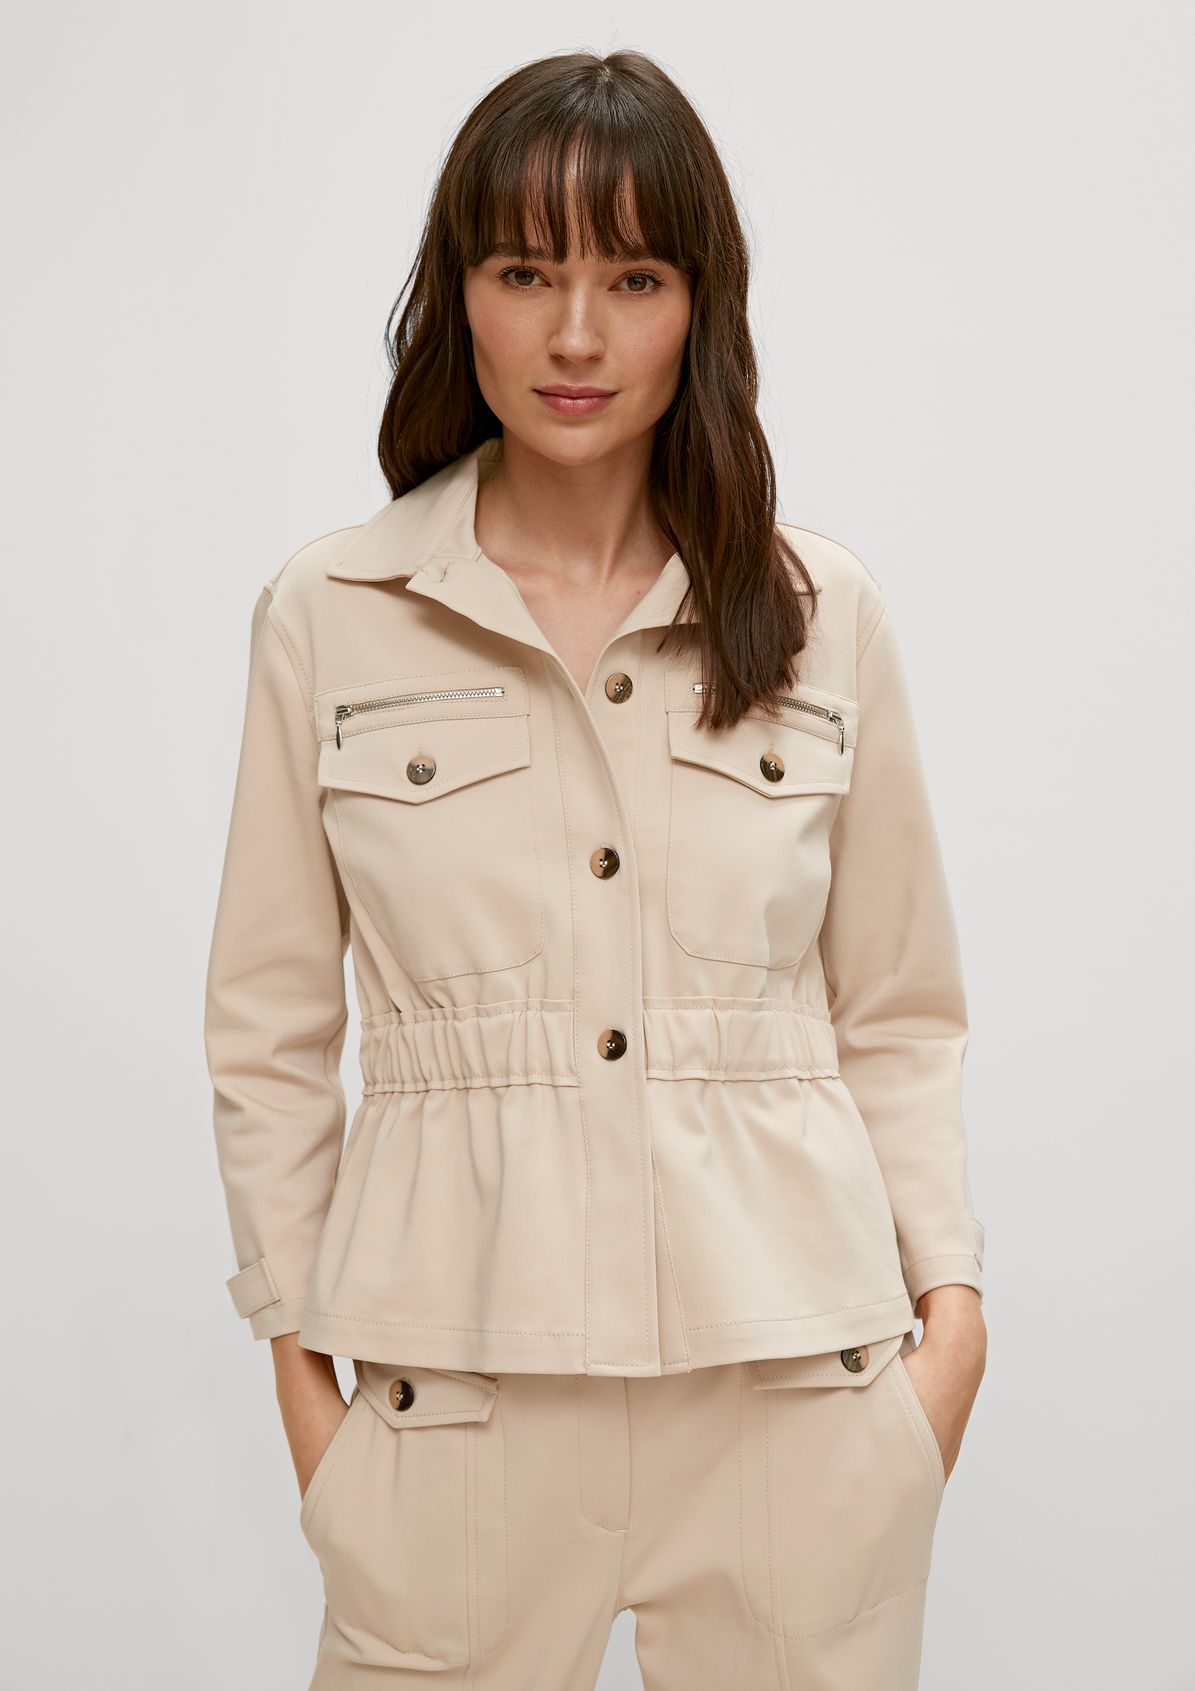 Blazer jacket in a utility style from comma